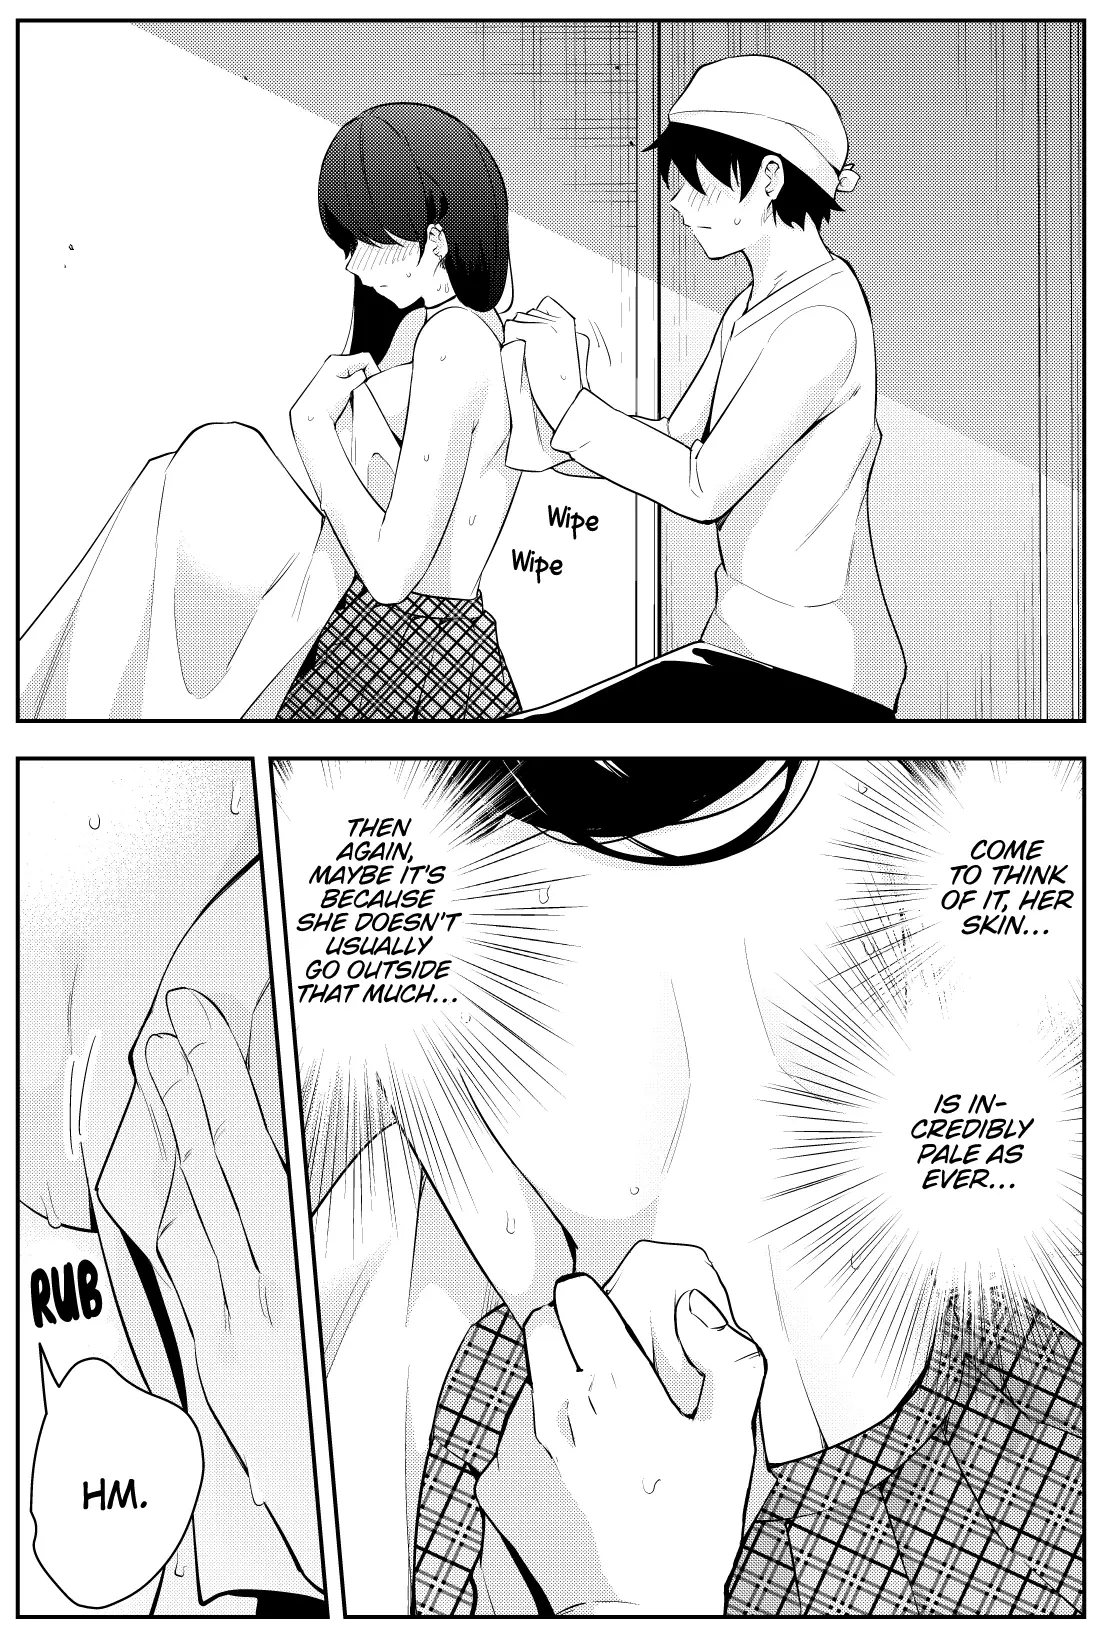 The Story Of A Manga Artist Confined By A Strange High School Girl - 46 page 7-366f9ac2